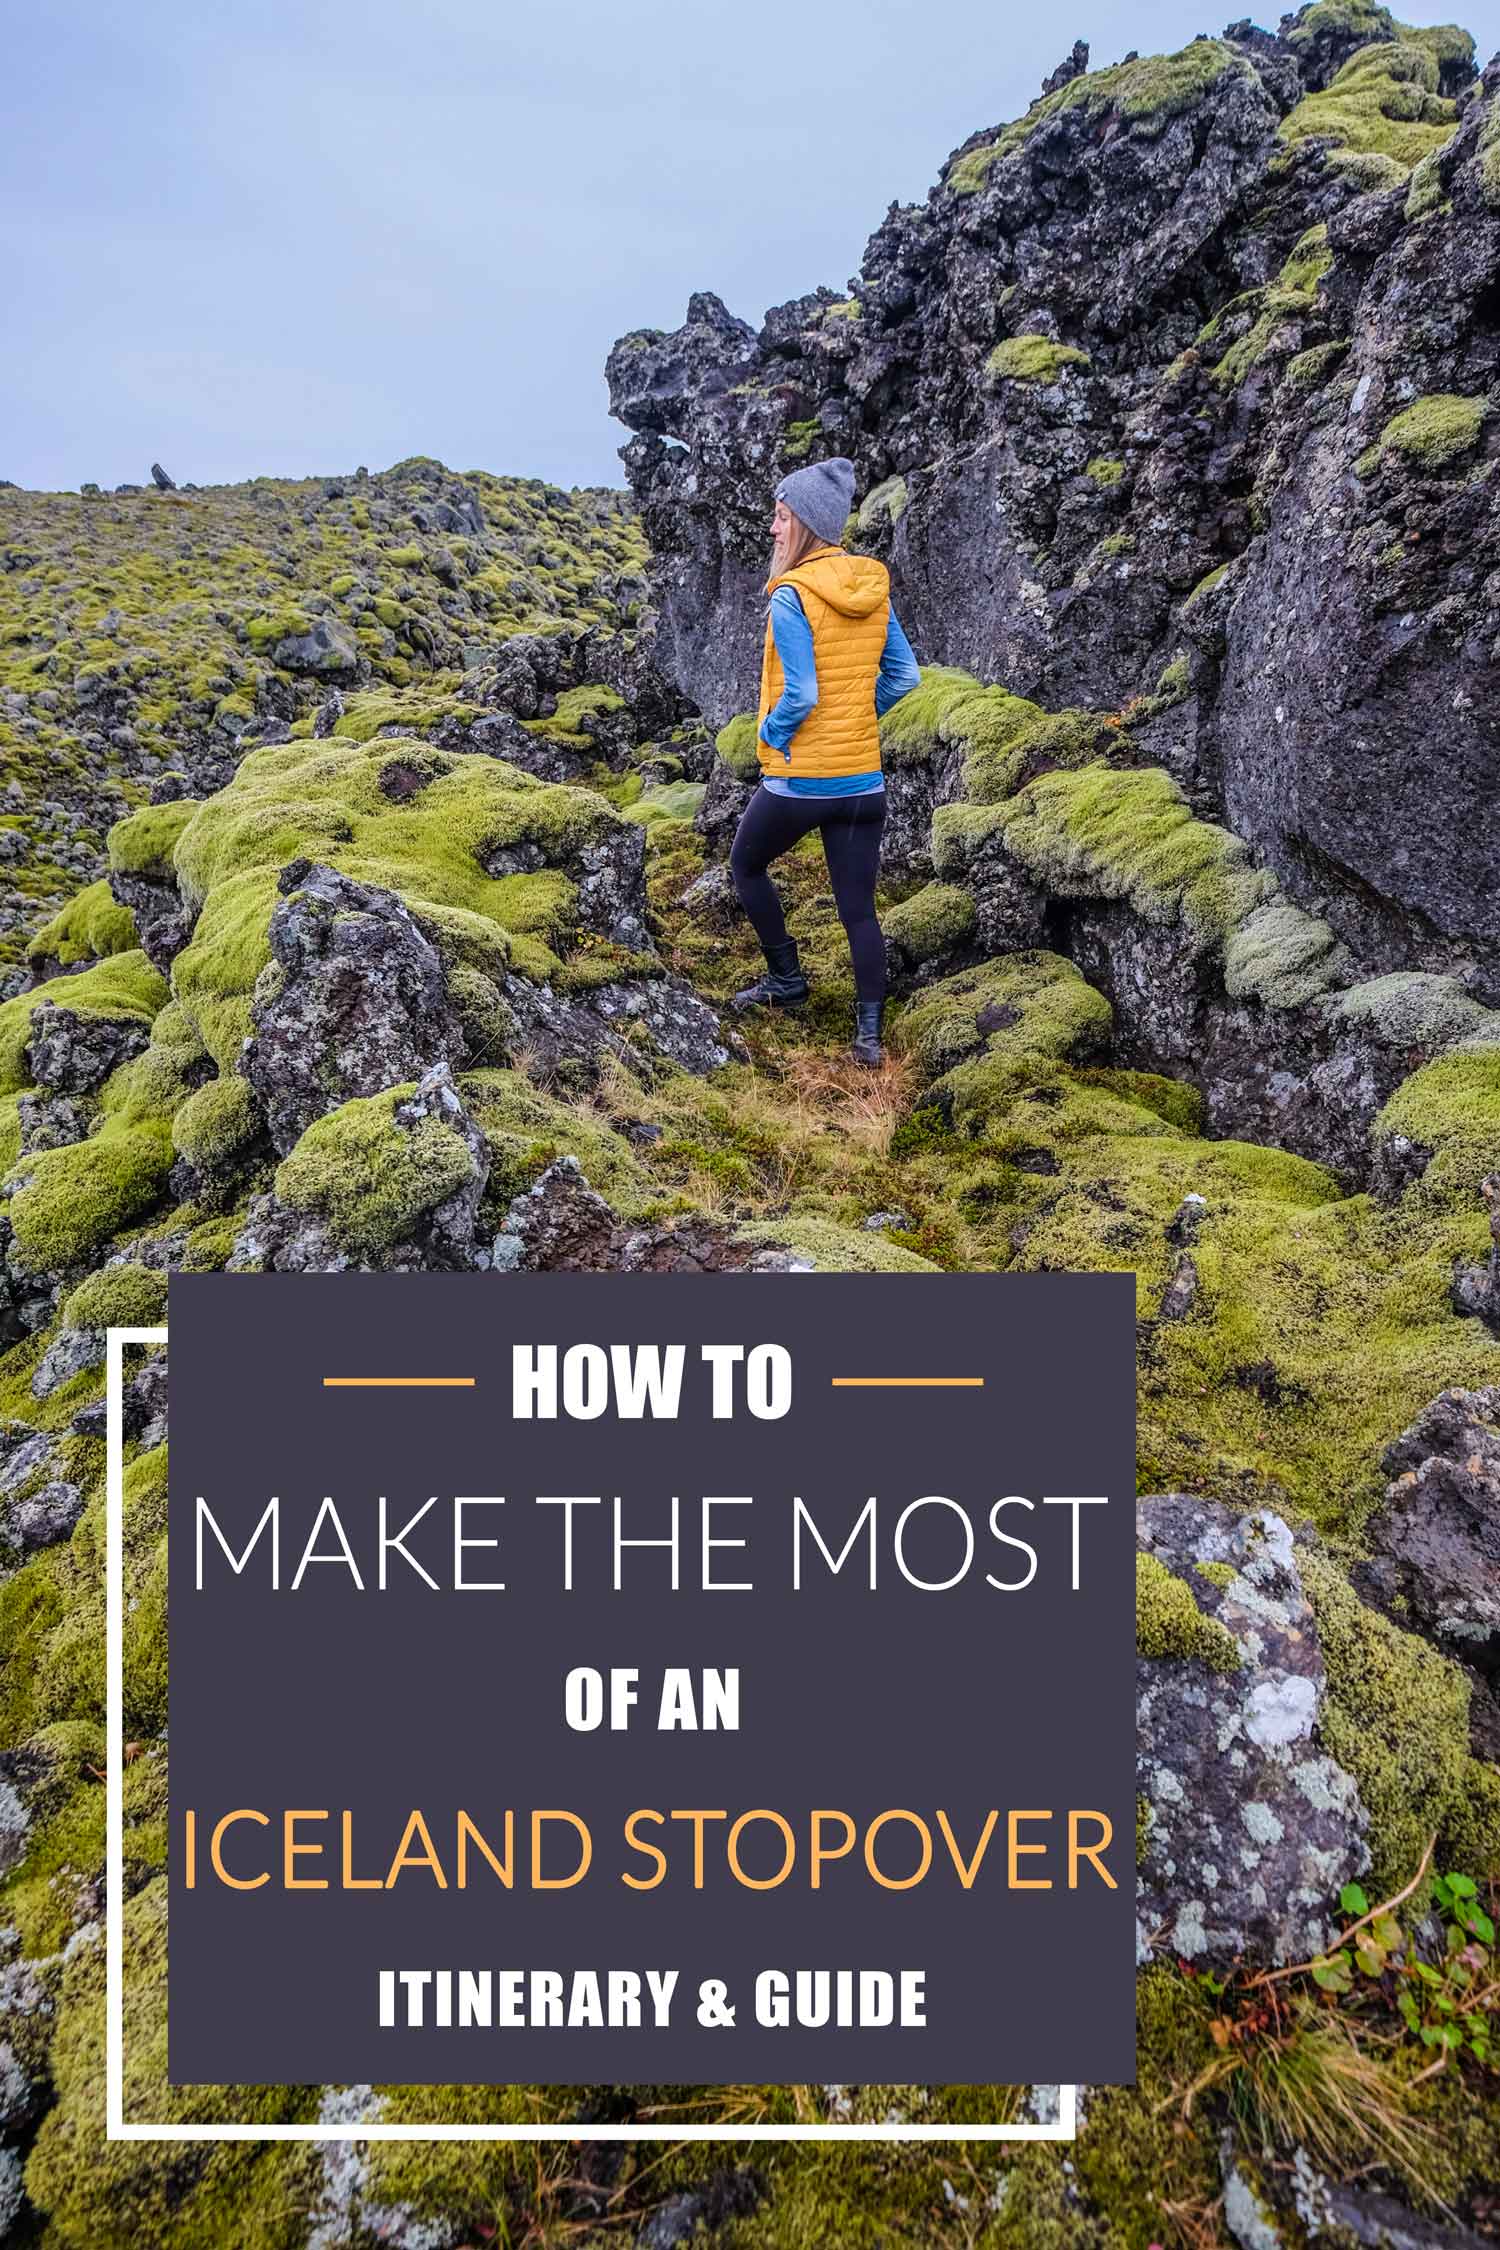 How to Make the Most of an Iceland Stopover